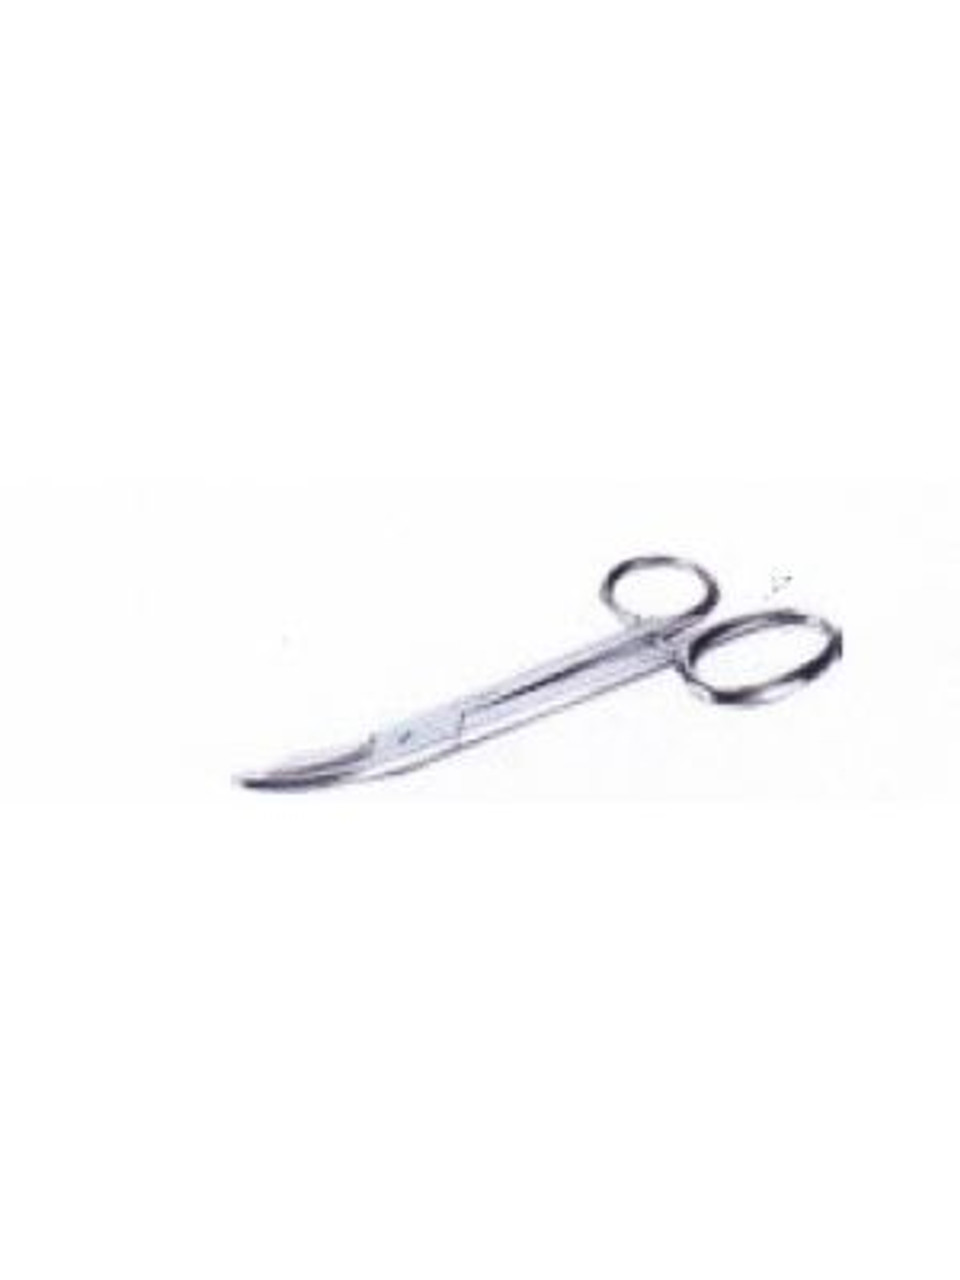 BSN-28230 CLEAN CUT SCISSORS FOR CAST REMOVAL